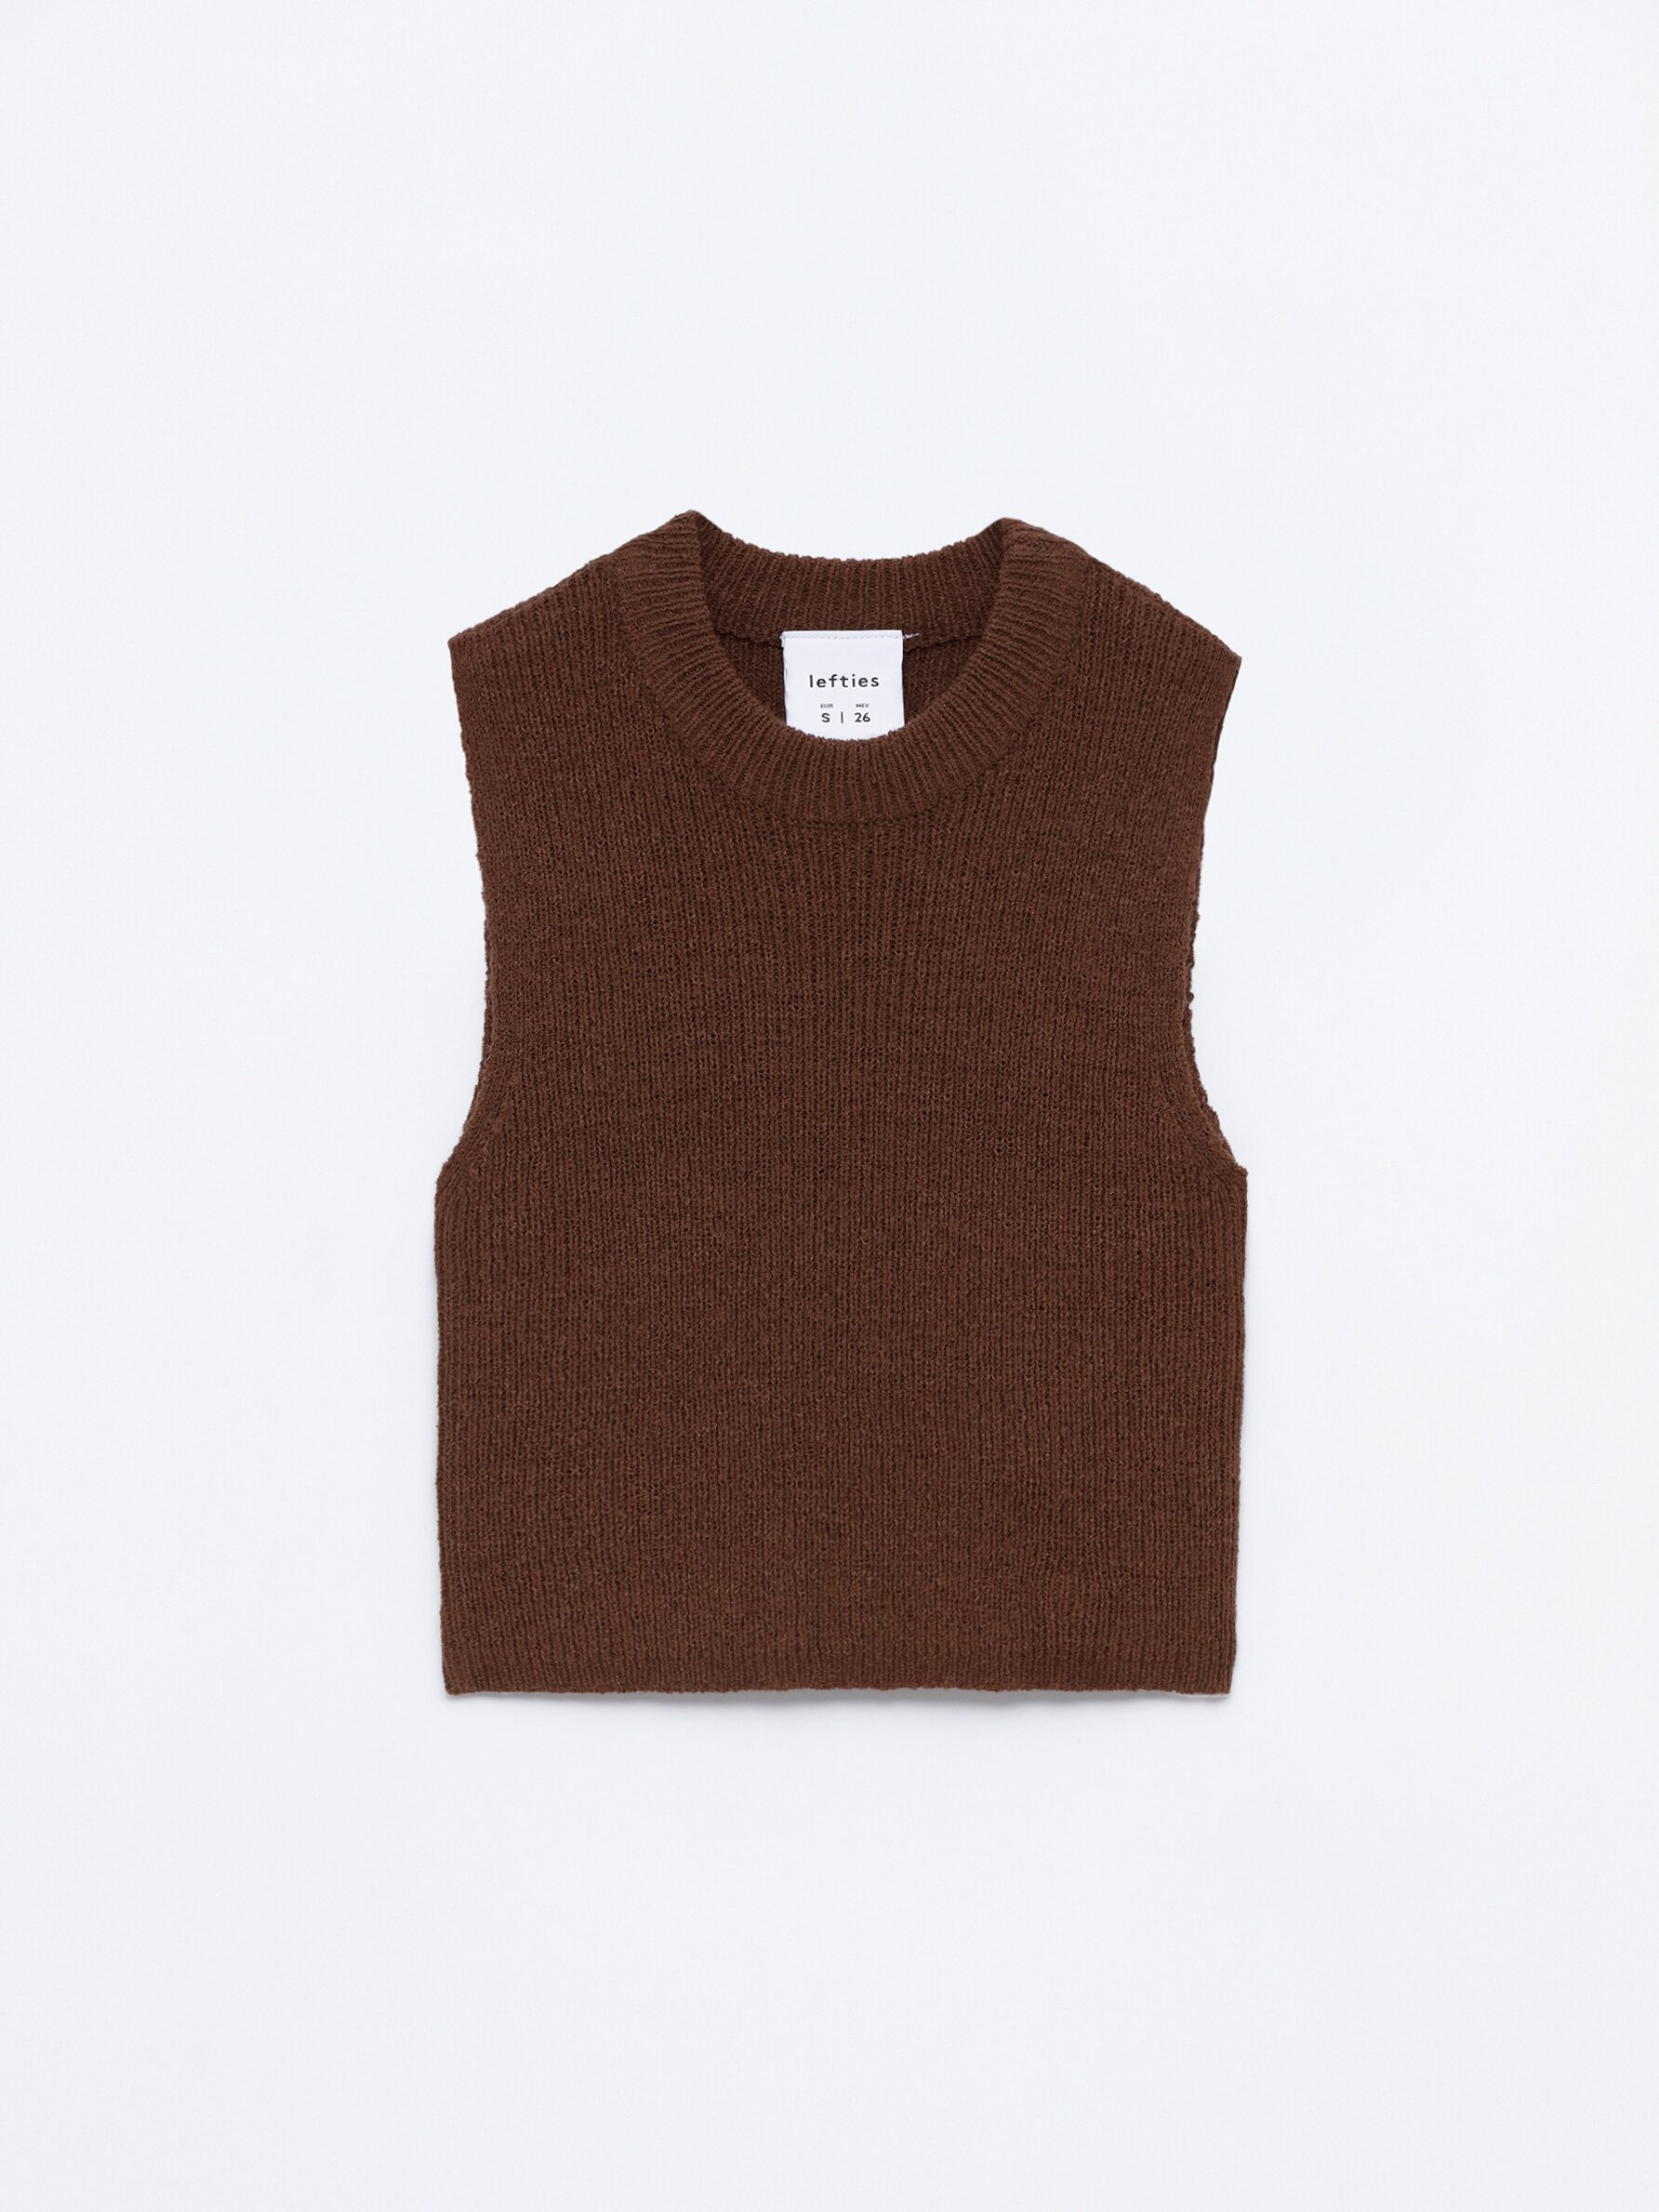 Knit top - NEW IN - Woman 